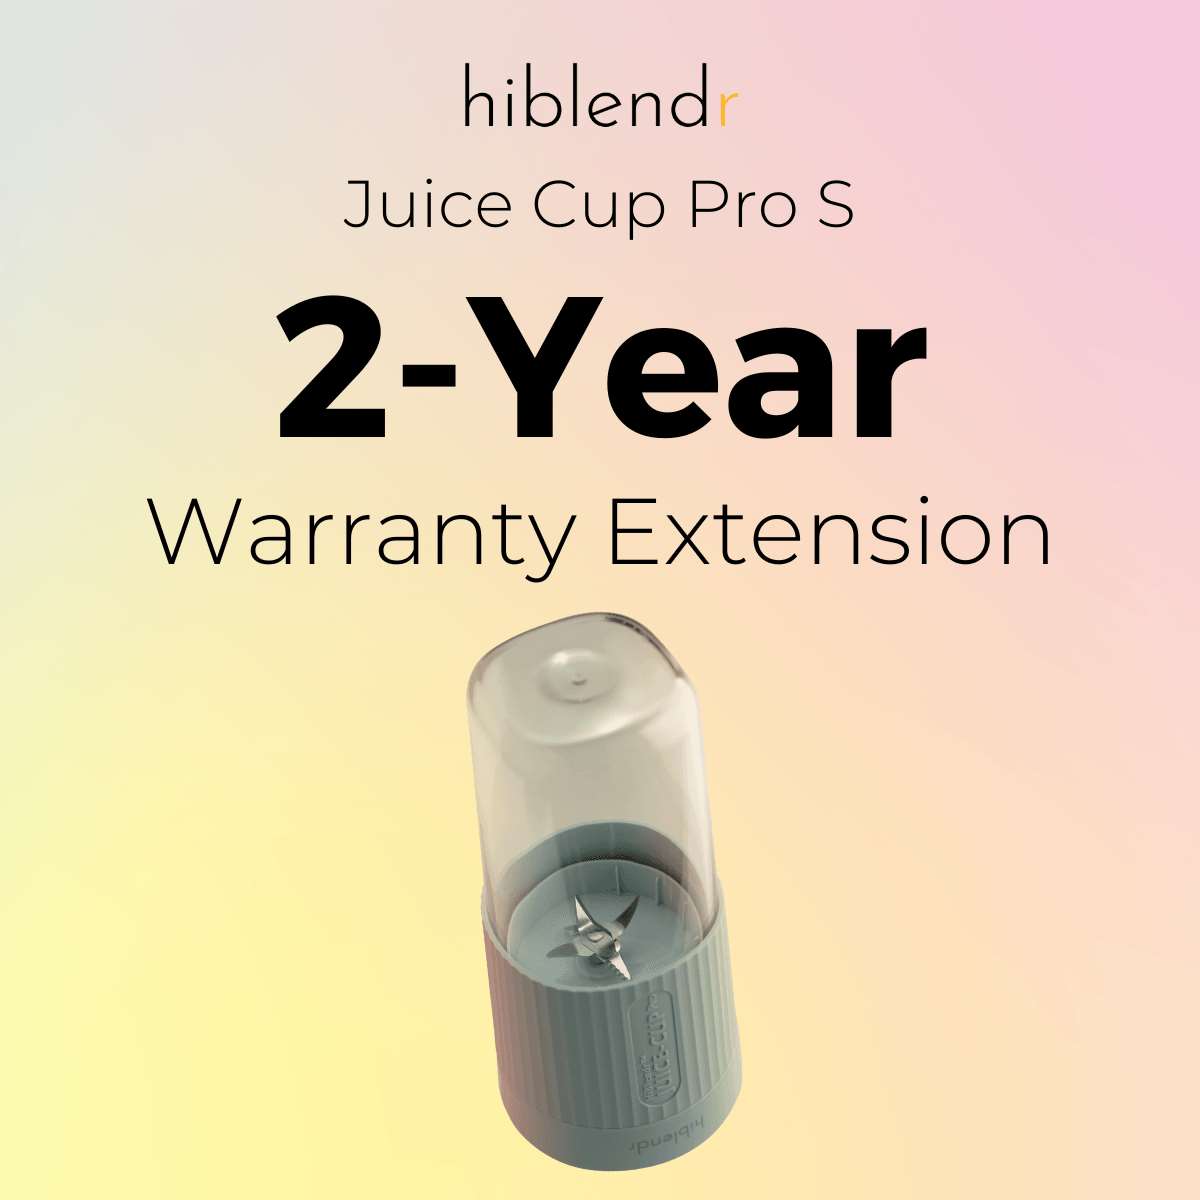 HiBlendrCare+ Warranty Extension (for JCP S) - HiBlendr MY